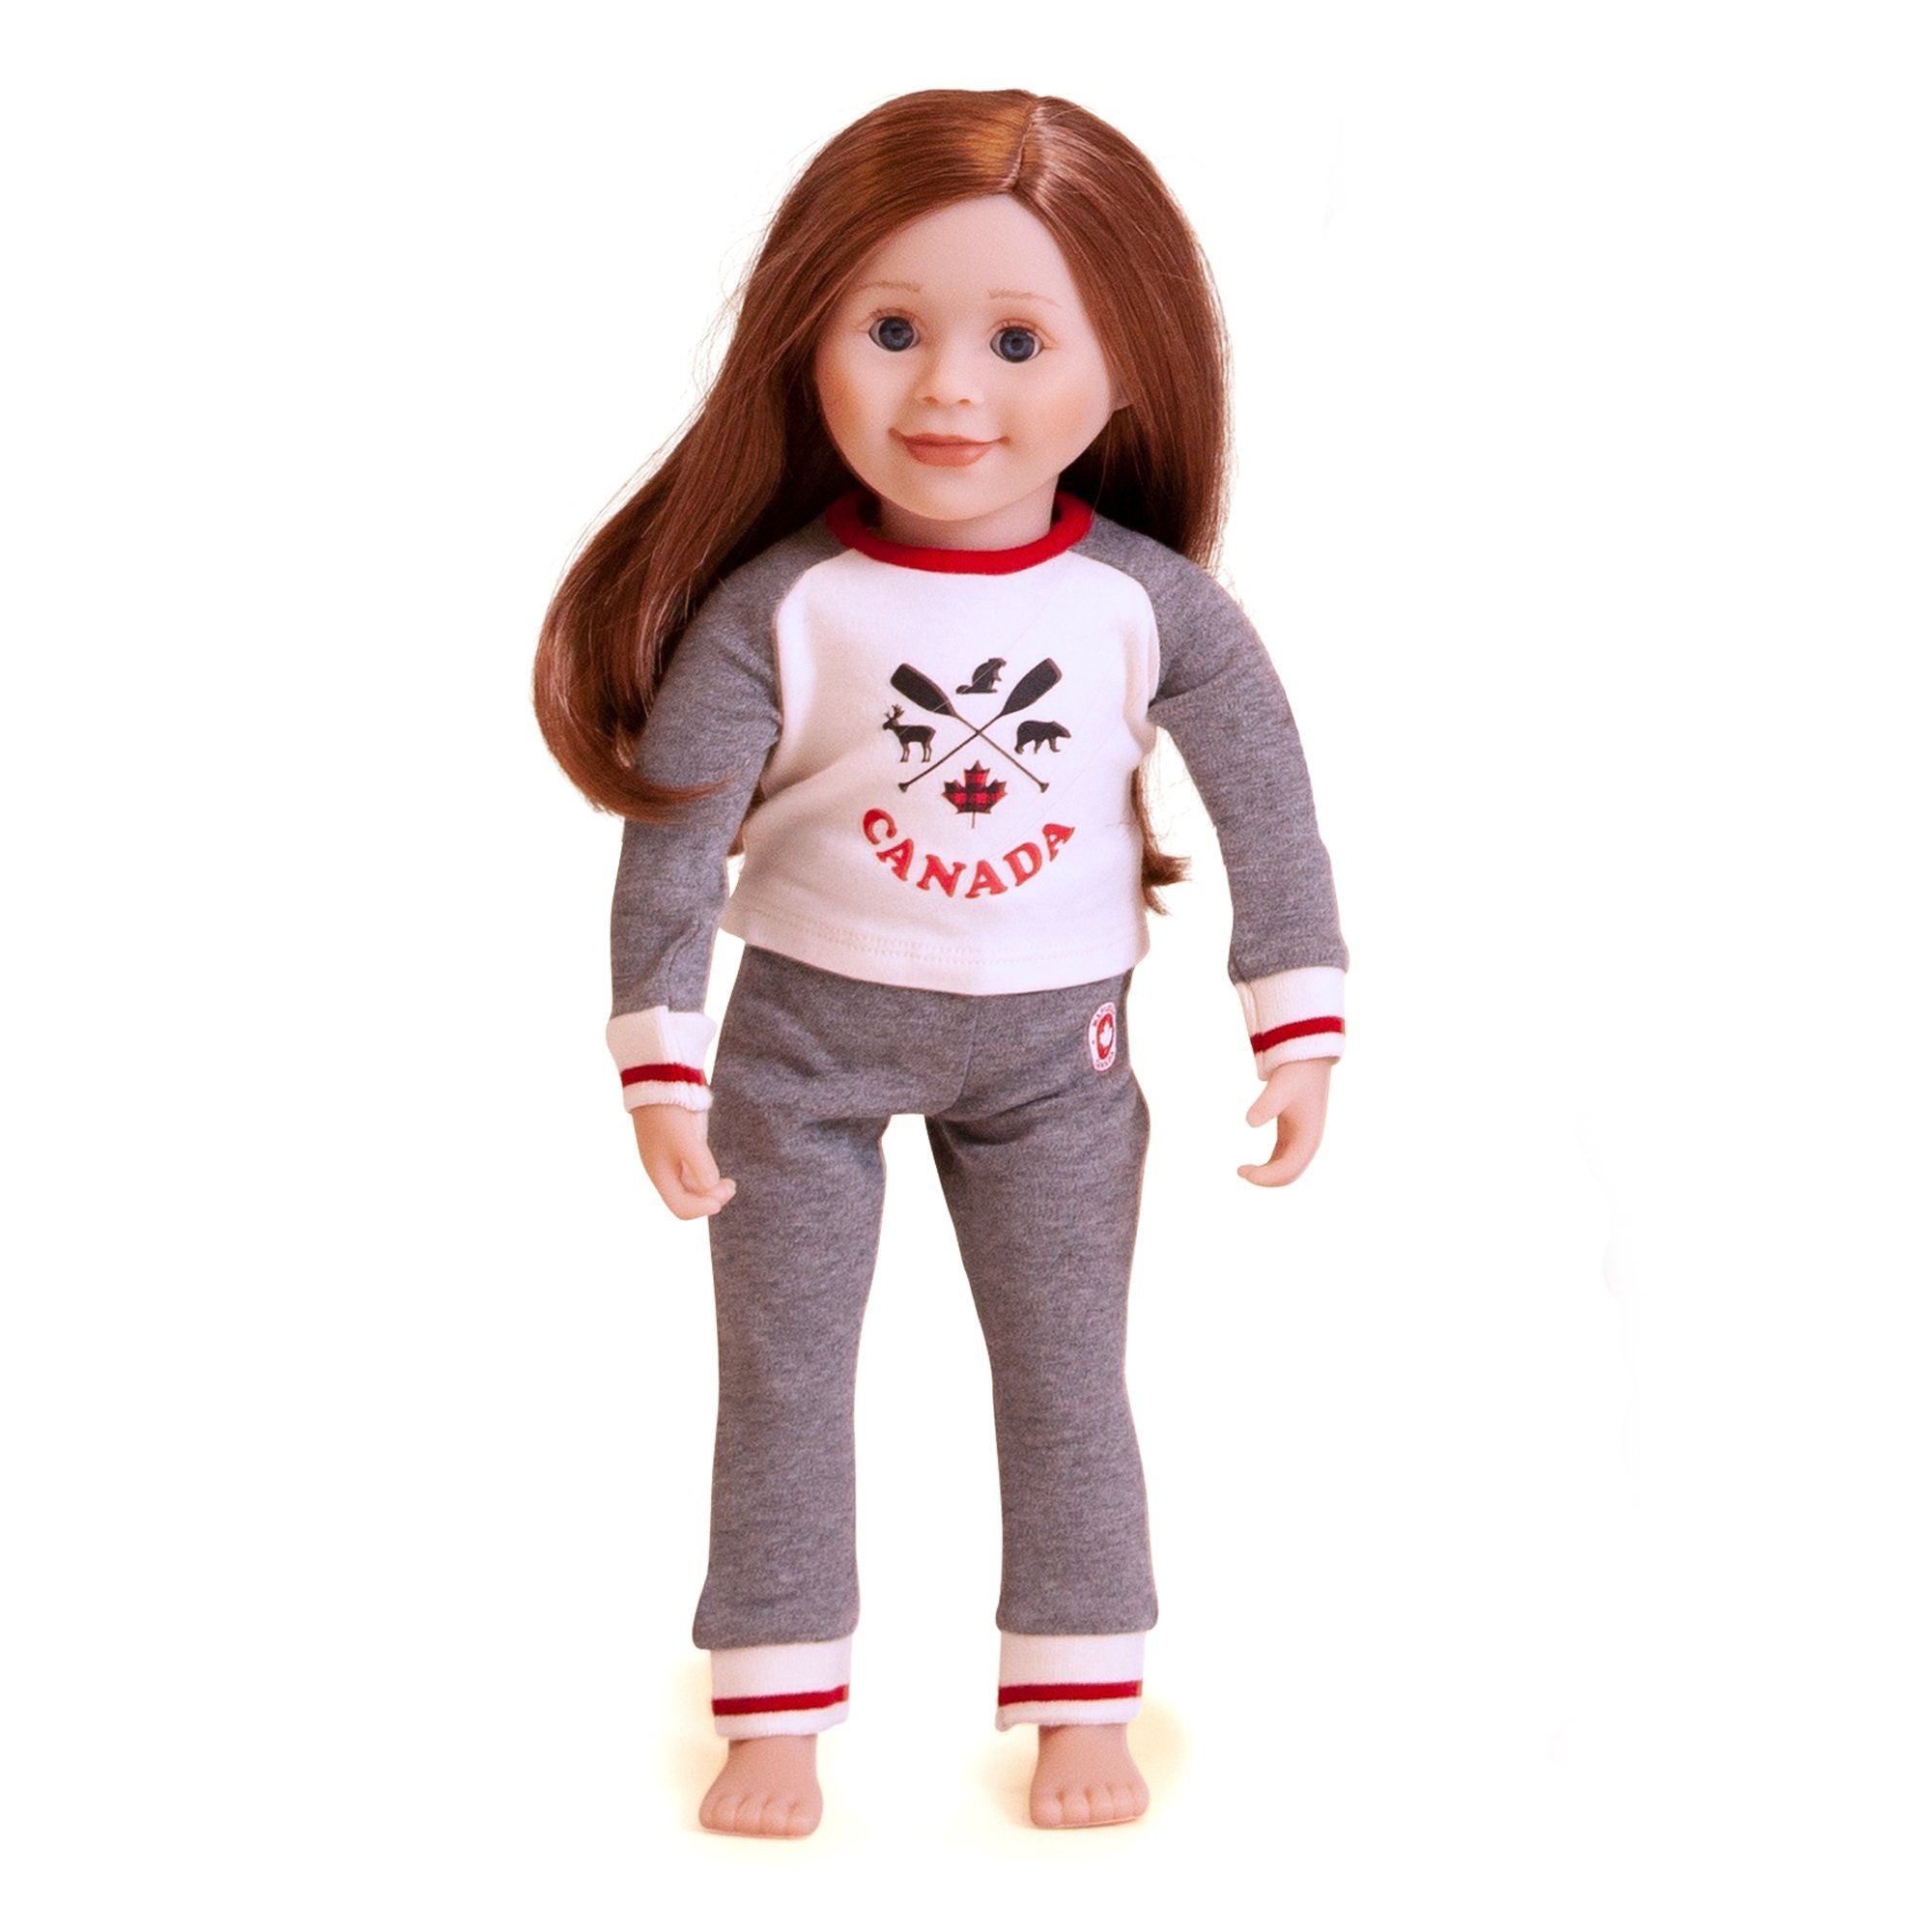 Iconic Canadian PJs for Dolls with matching Family PJs